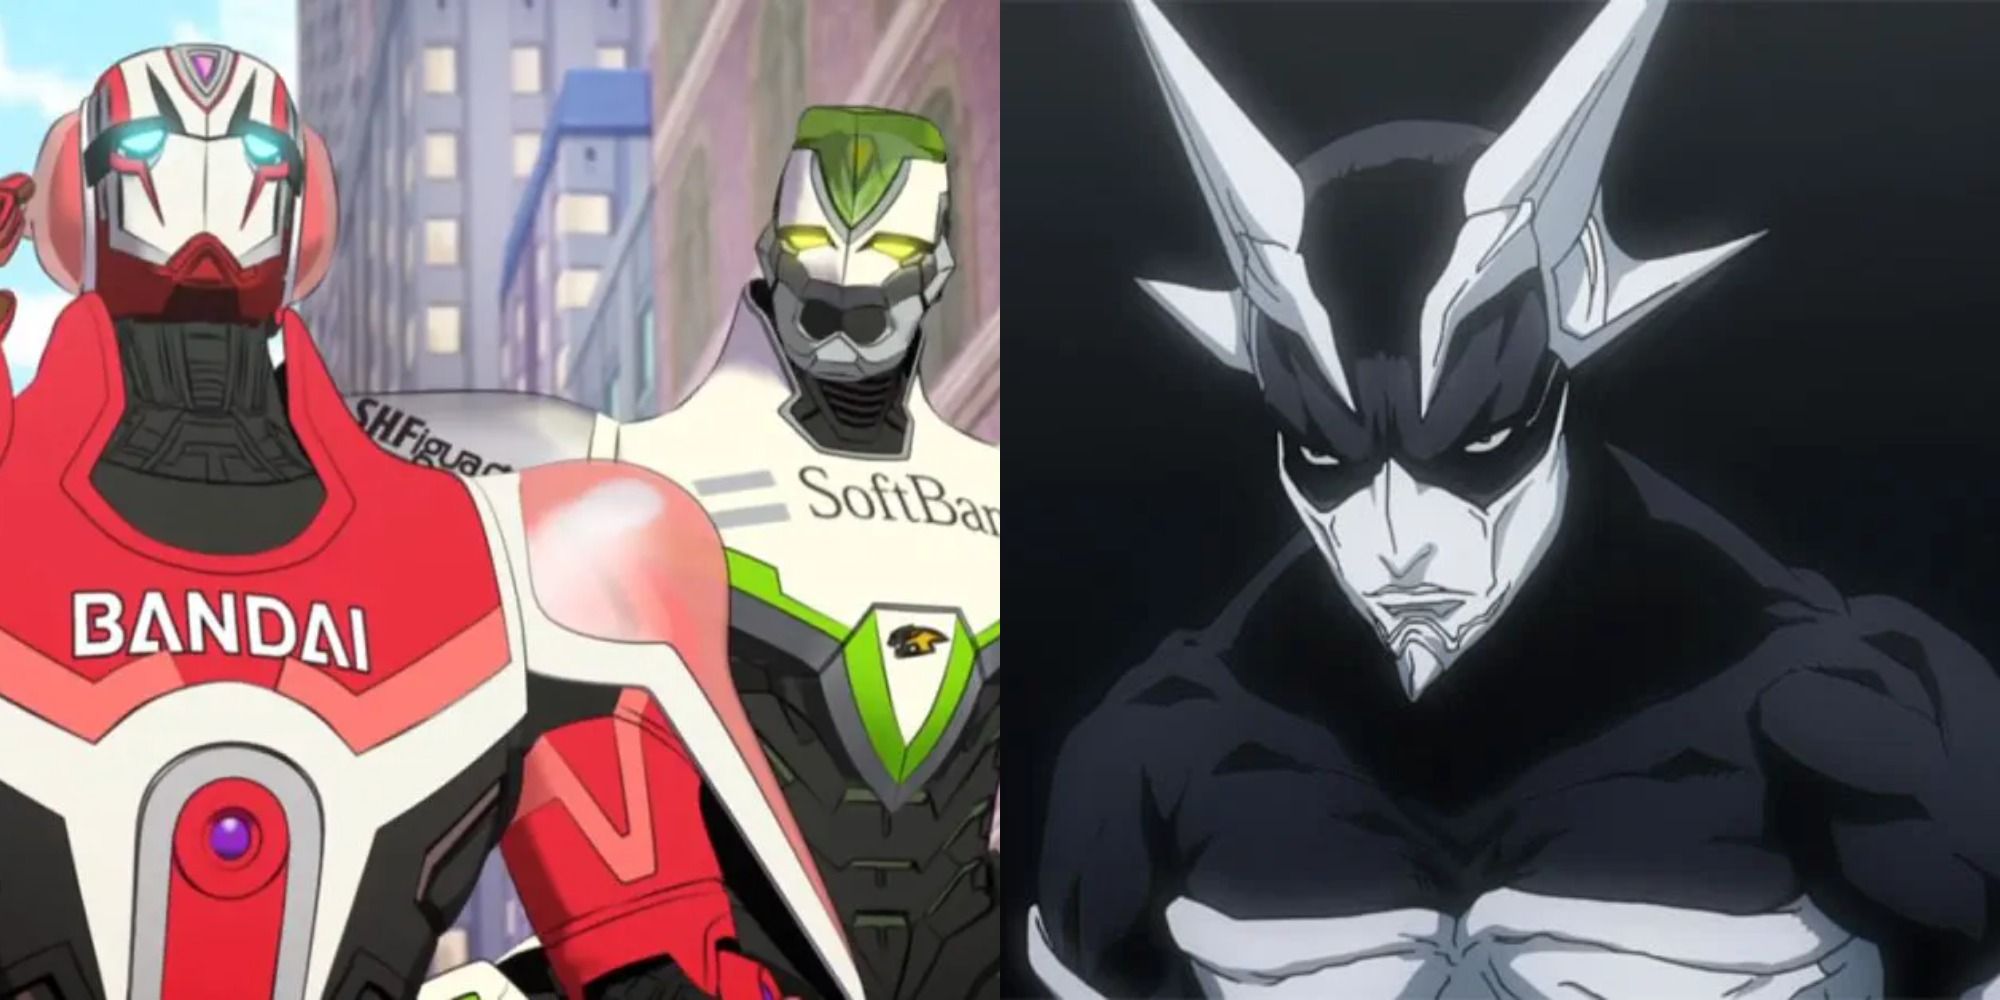 Split image showing characters from Tiger & Bunny and Zetman